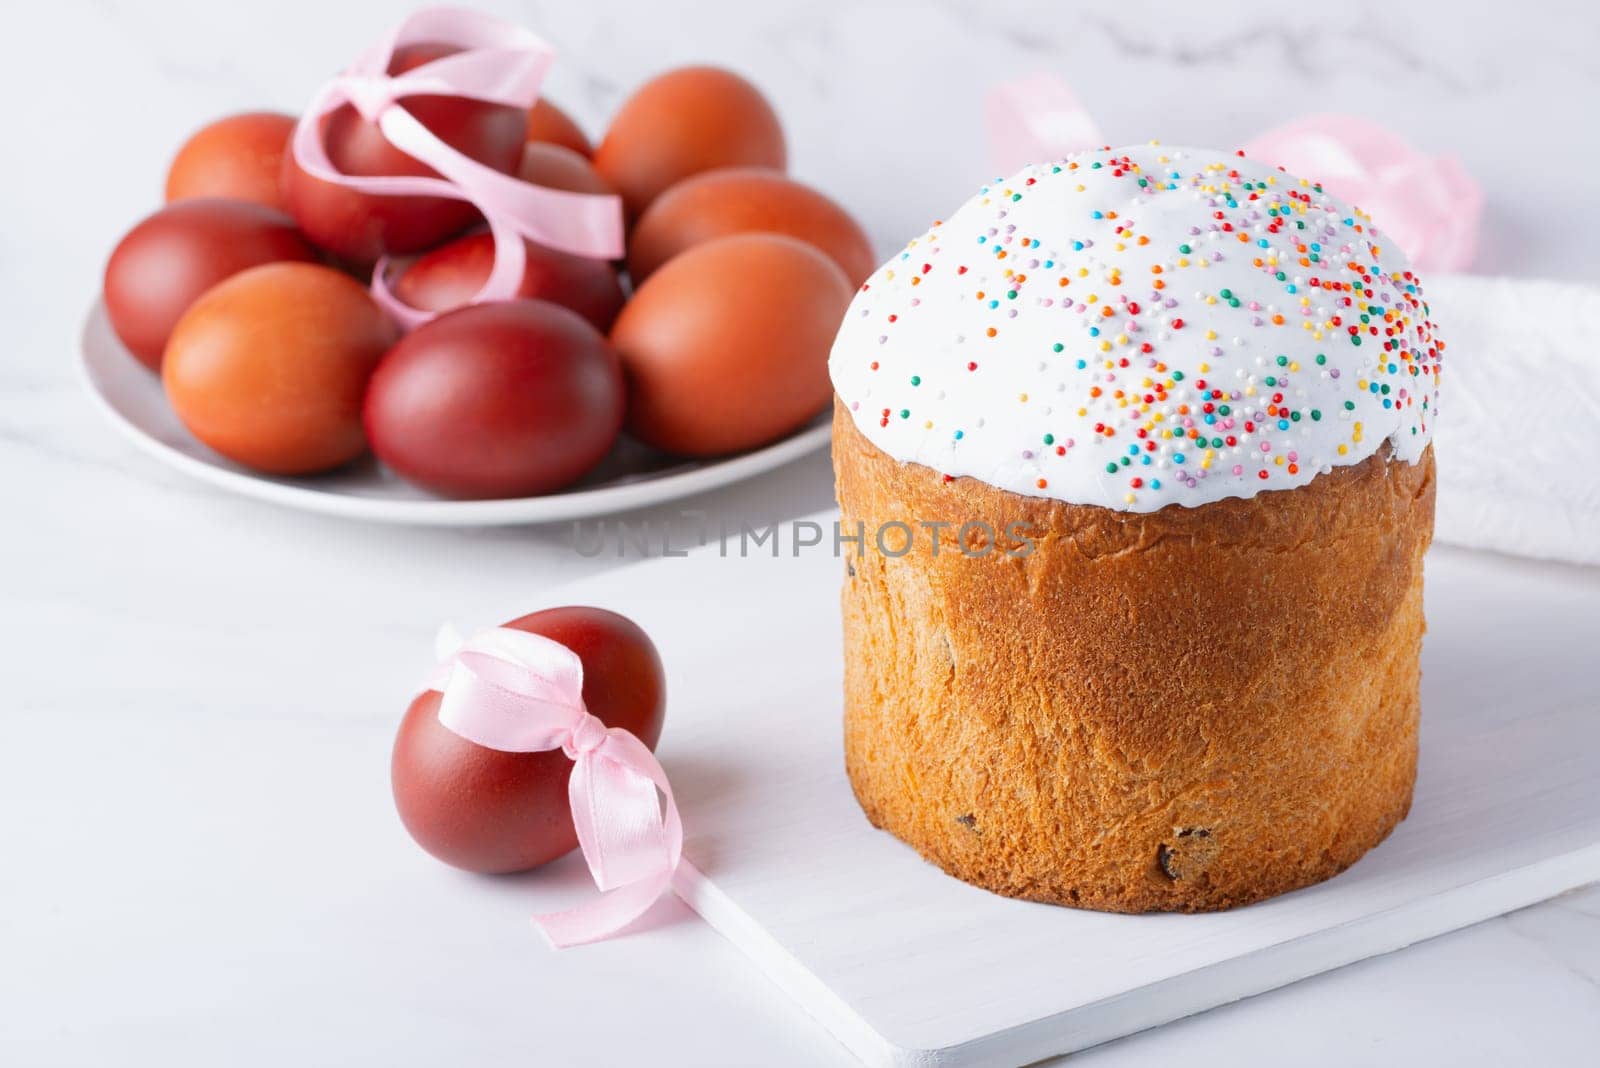 Delicious Easter cakes and eggs on light background by NataliPopova